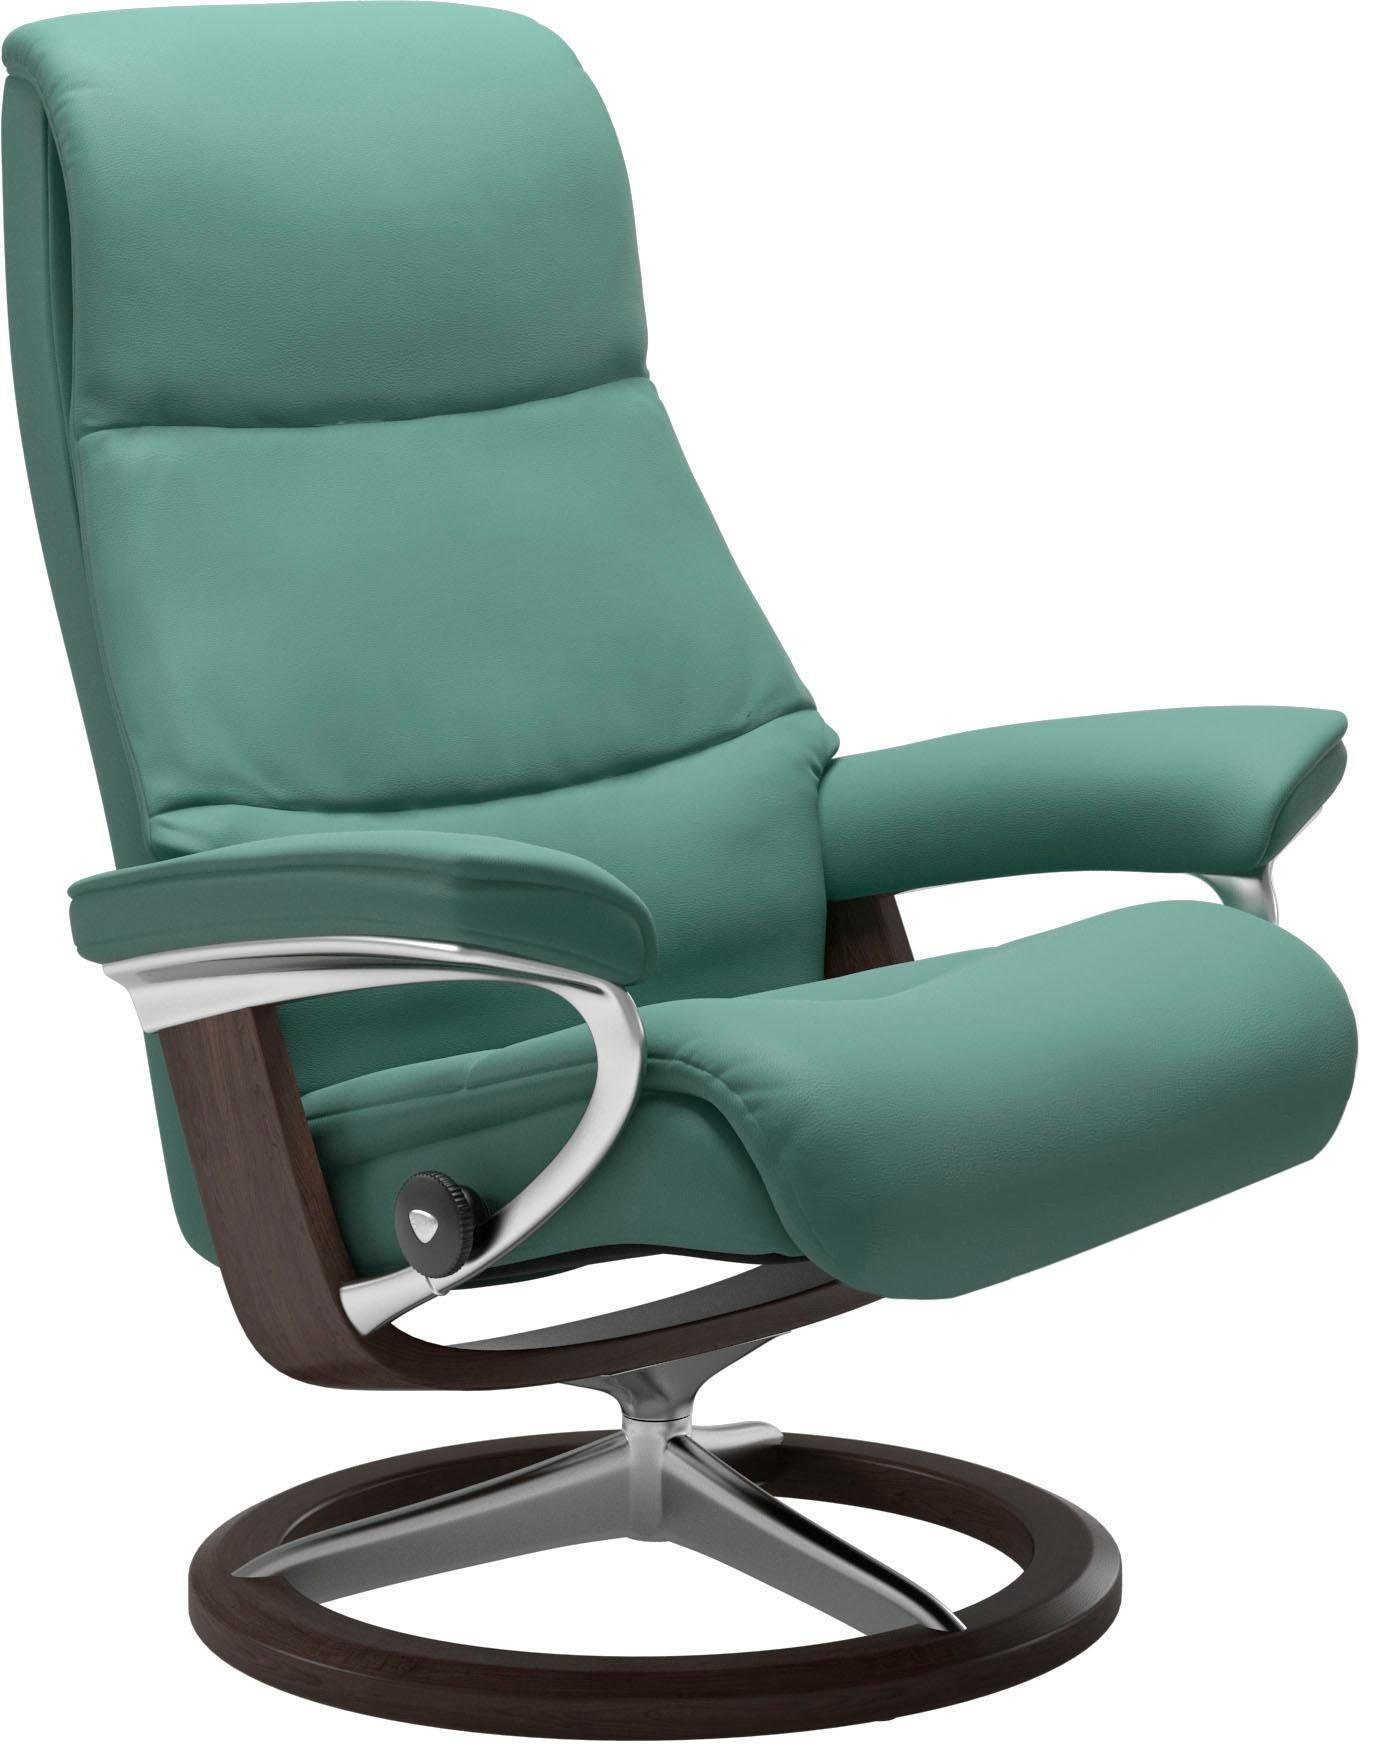 L,Gestell Signature Base, View, Wenge mit Größe Stressless® Relaxsessel